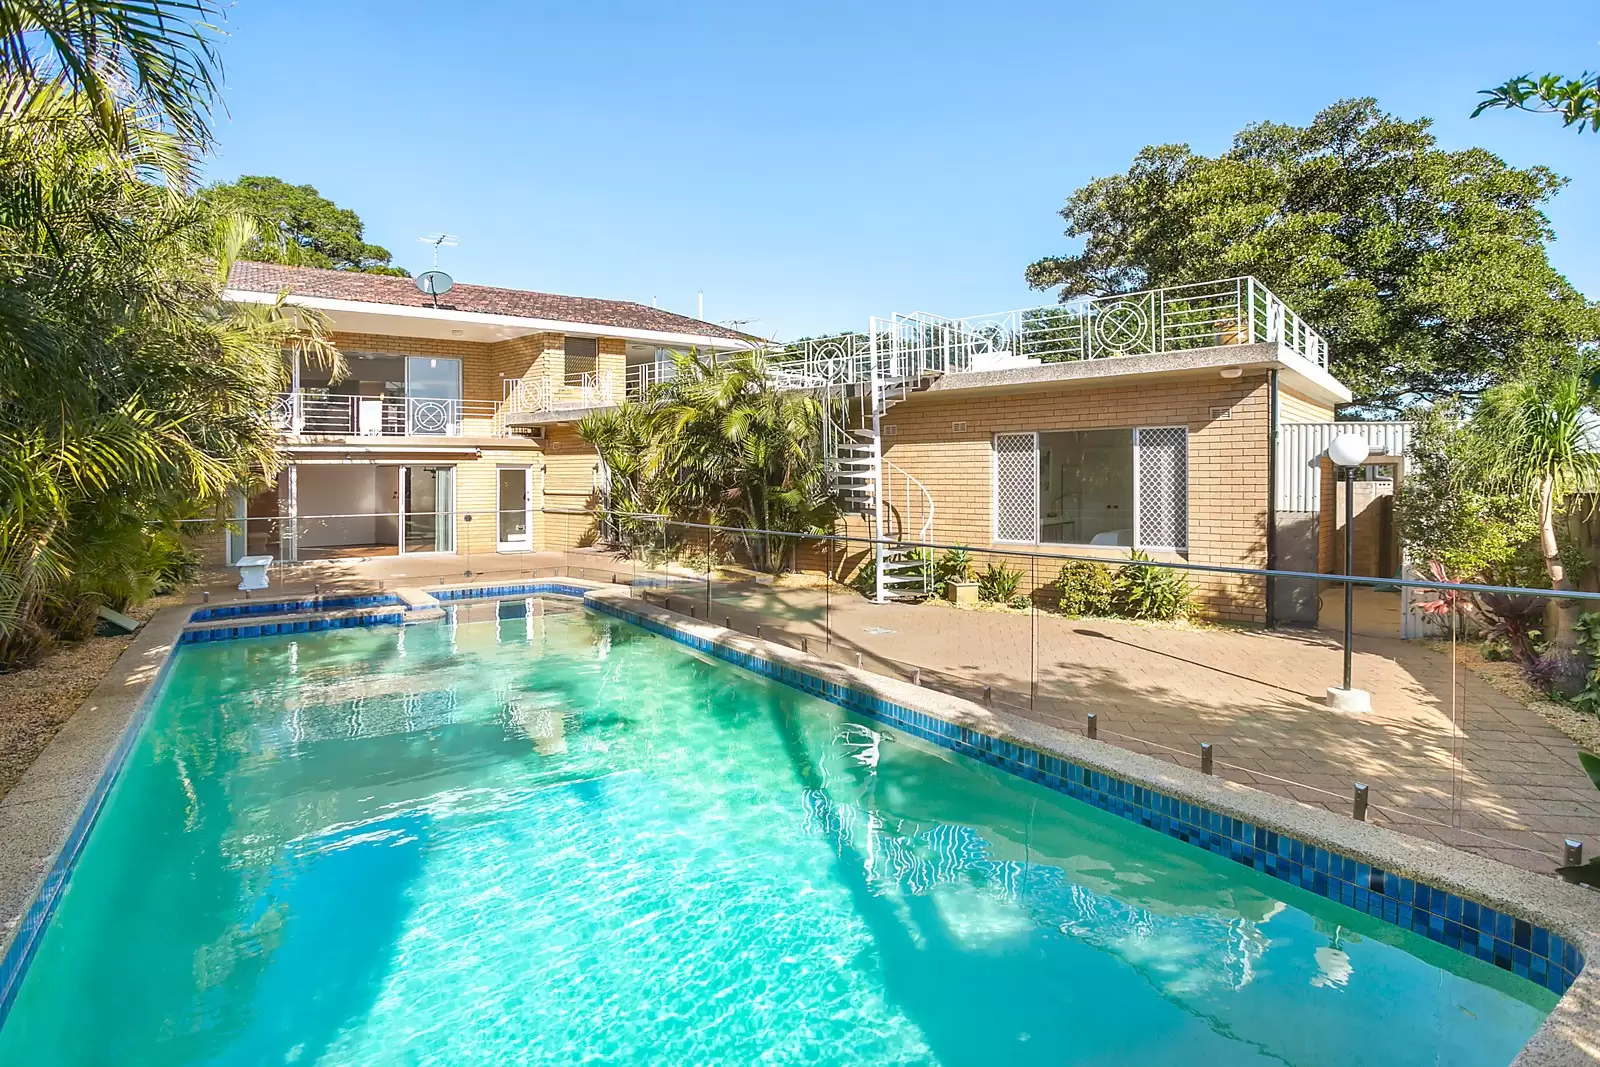 Photo #4: 1 Macarthur Avenue, Pagewood - Sold by Sydney Sotheby's International Realty